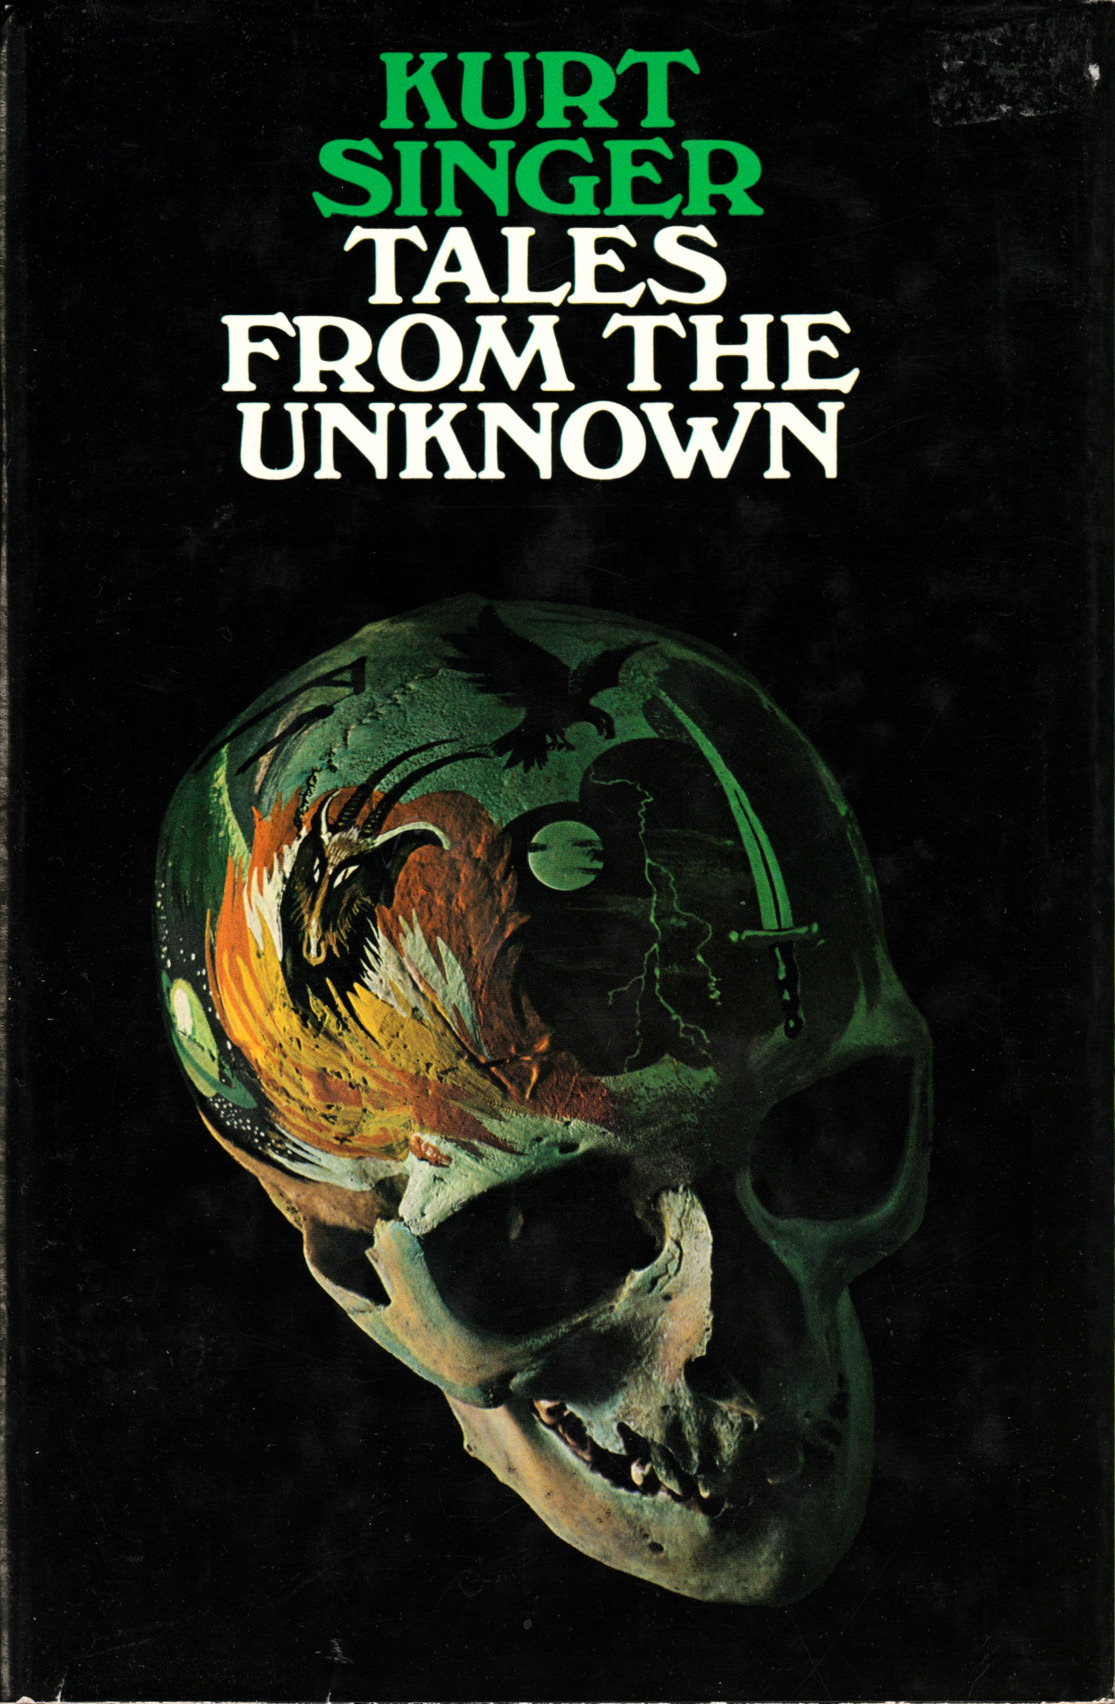 Tales From The Unknown, edited by Kurt Singer (W.H.Allen, 1970). From a charity shop